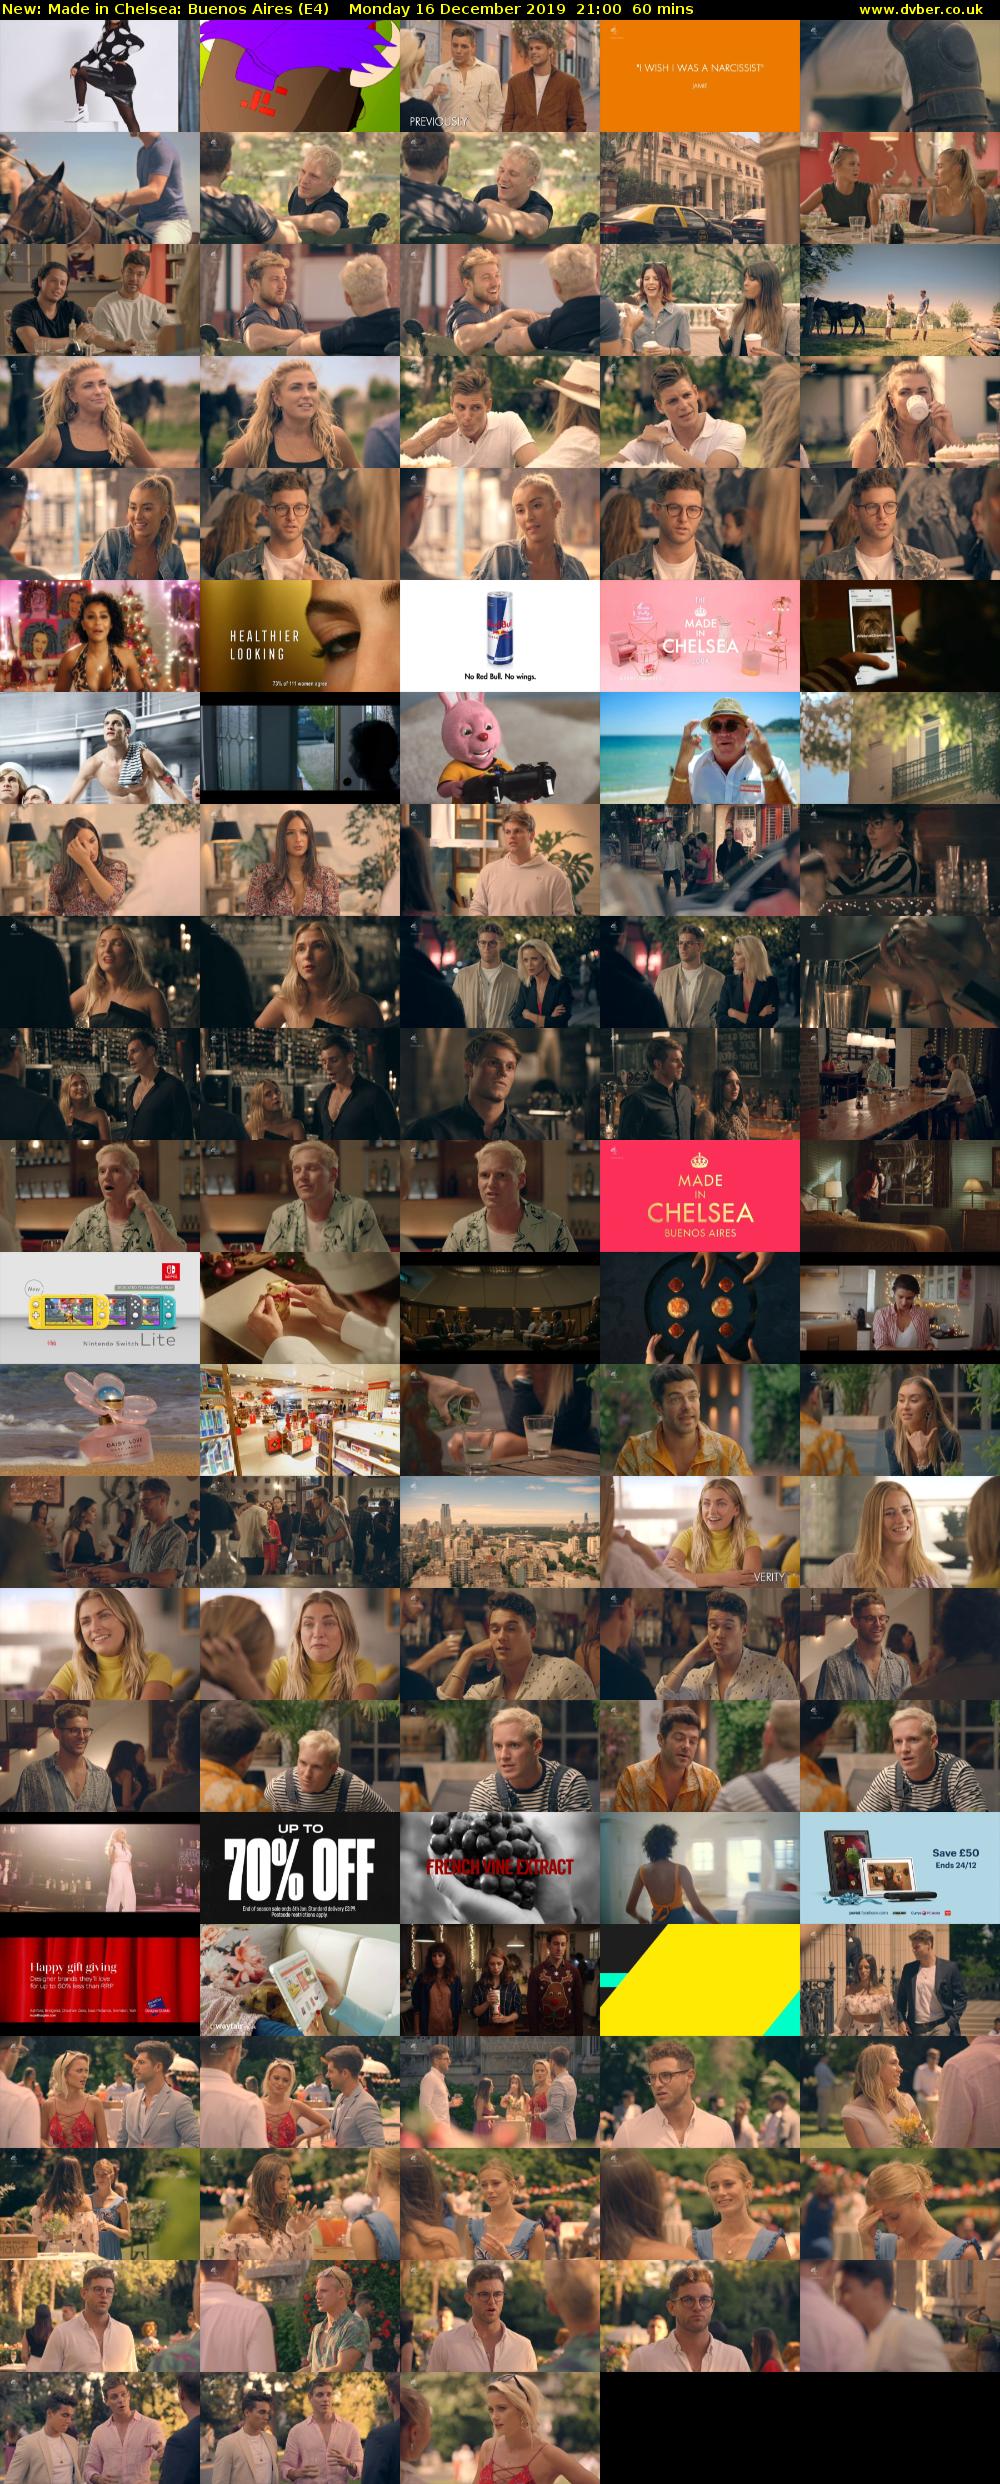 Made in Chelsea: Buenos Aires (E4) Monday 16 December 2019 21:00 - 22:00